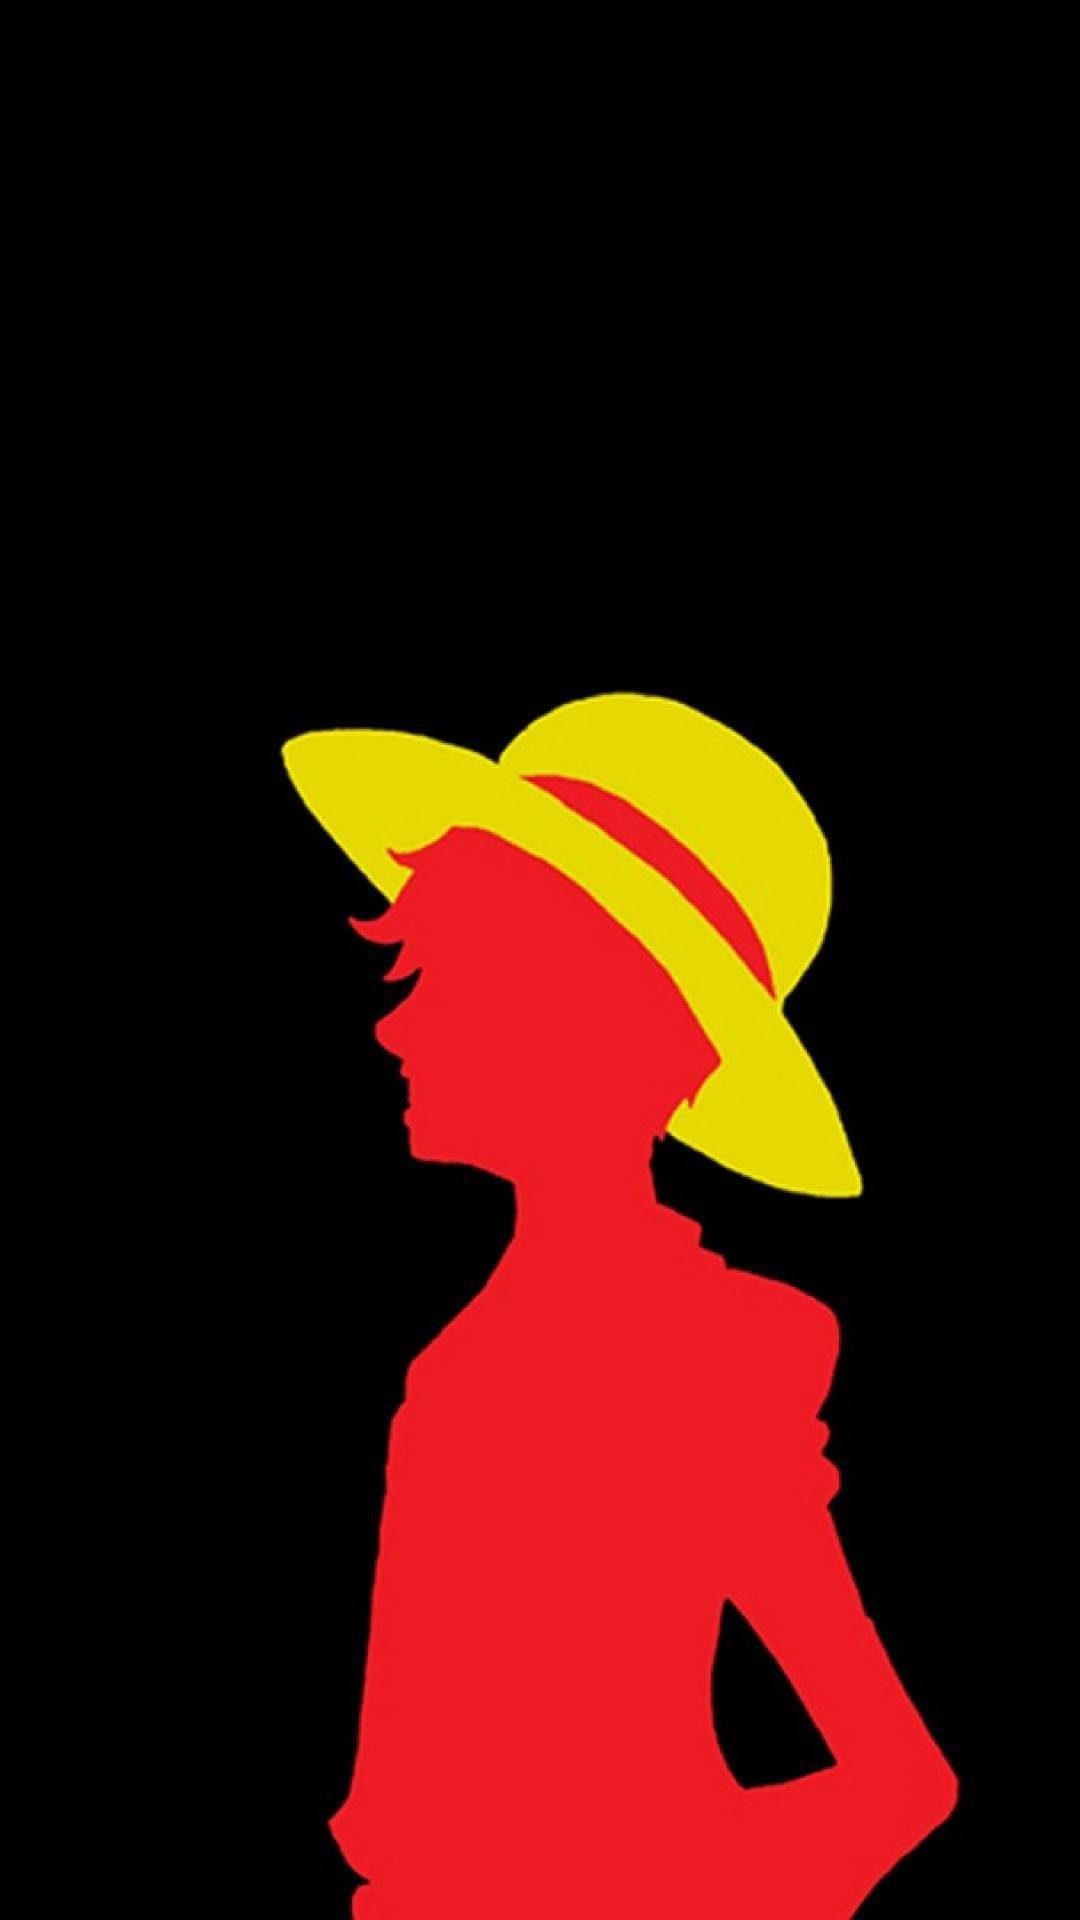 One Piece Phone Luffy Silhouette With Straw Hat Wallpaper